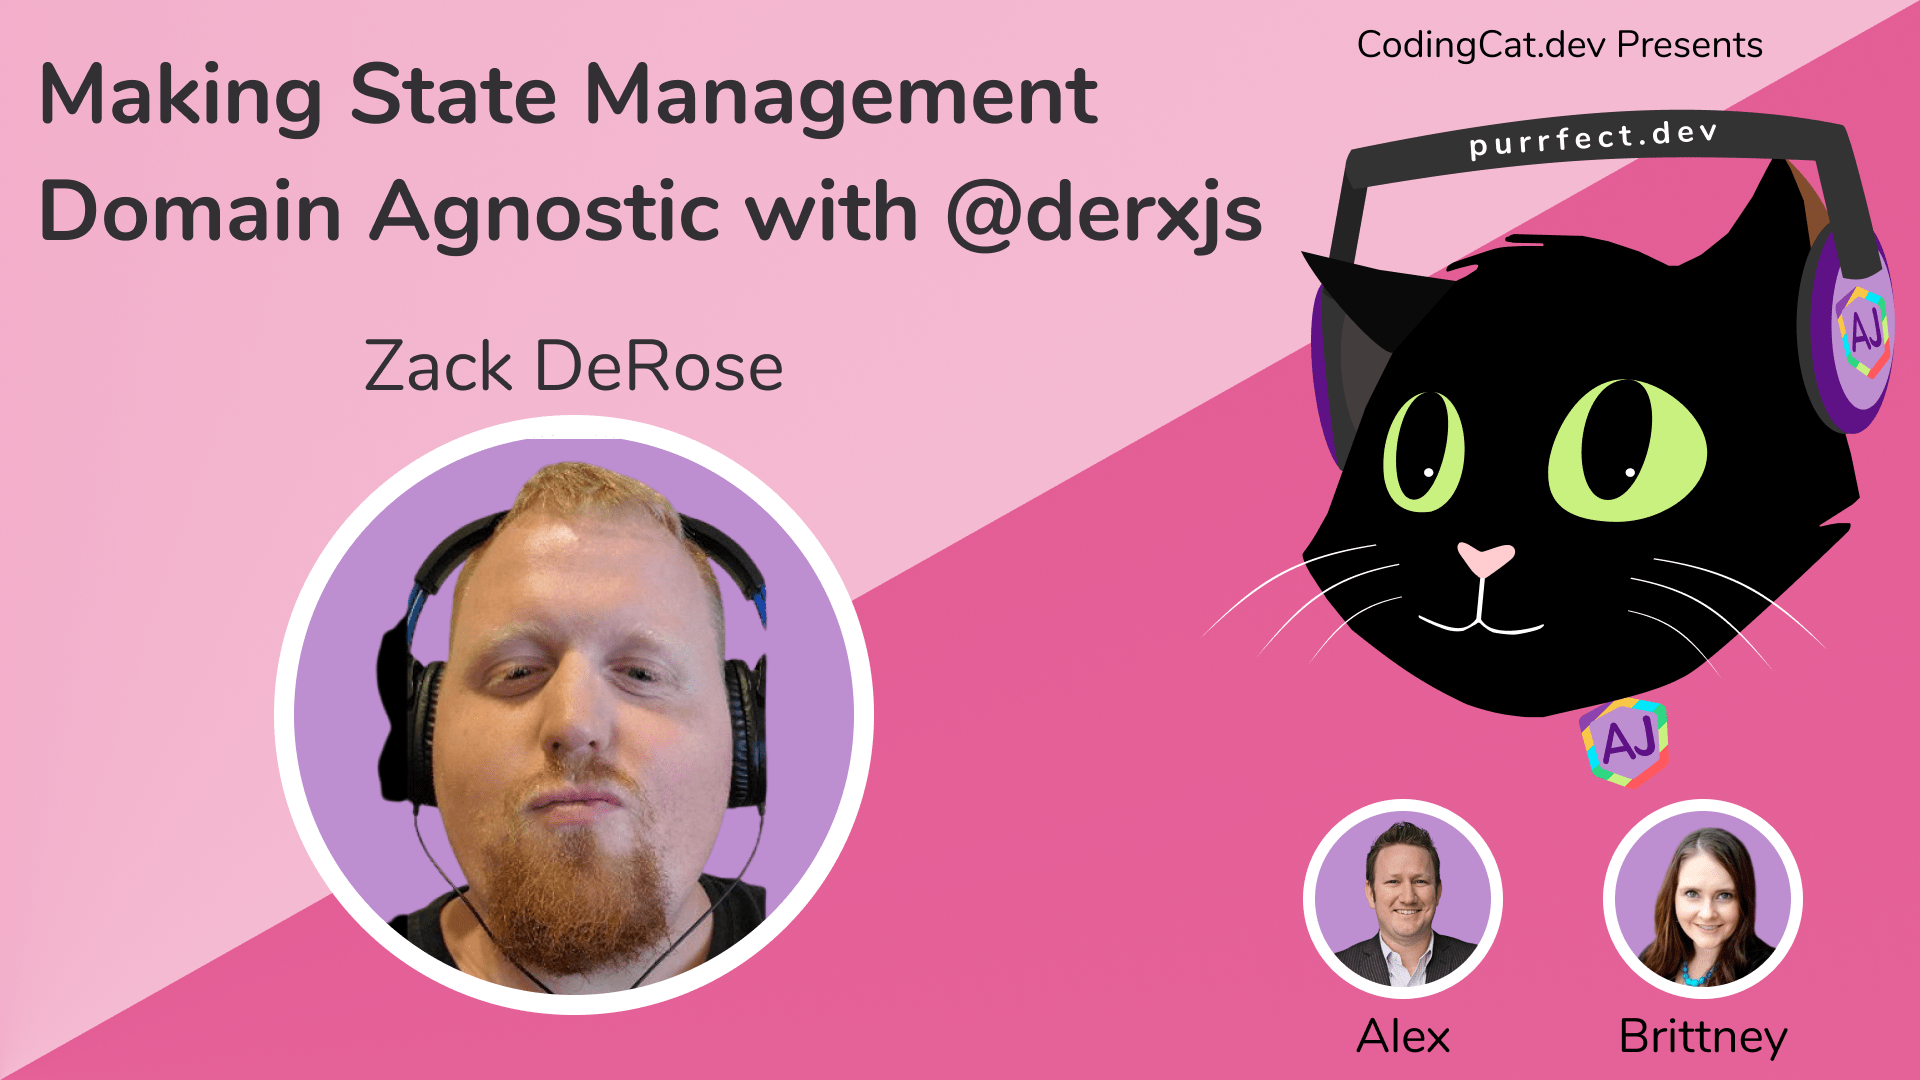 1.50 - Making State Management Domain Agnostic with @derxjs